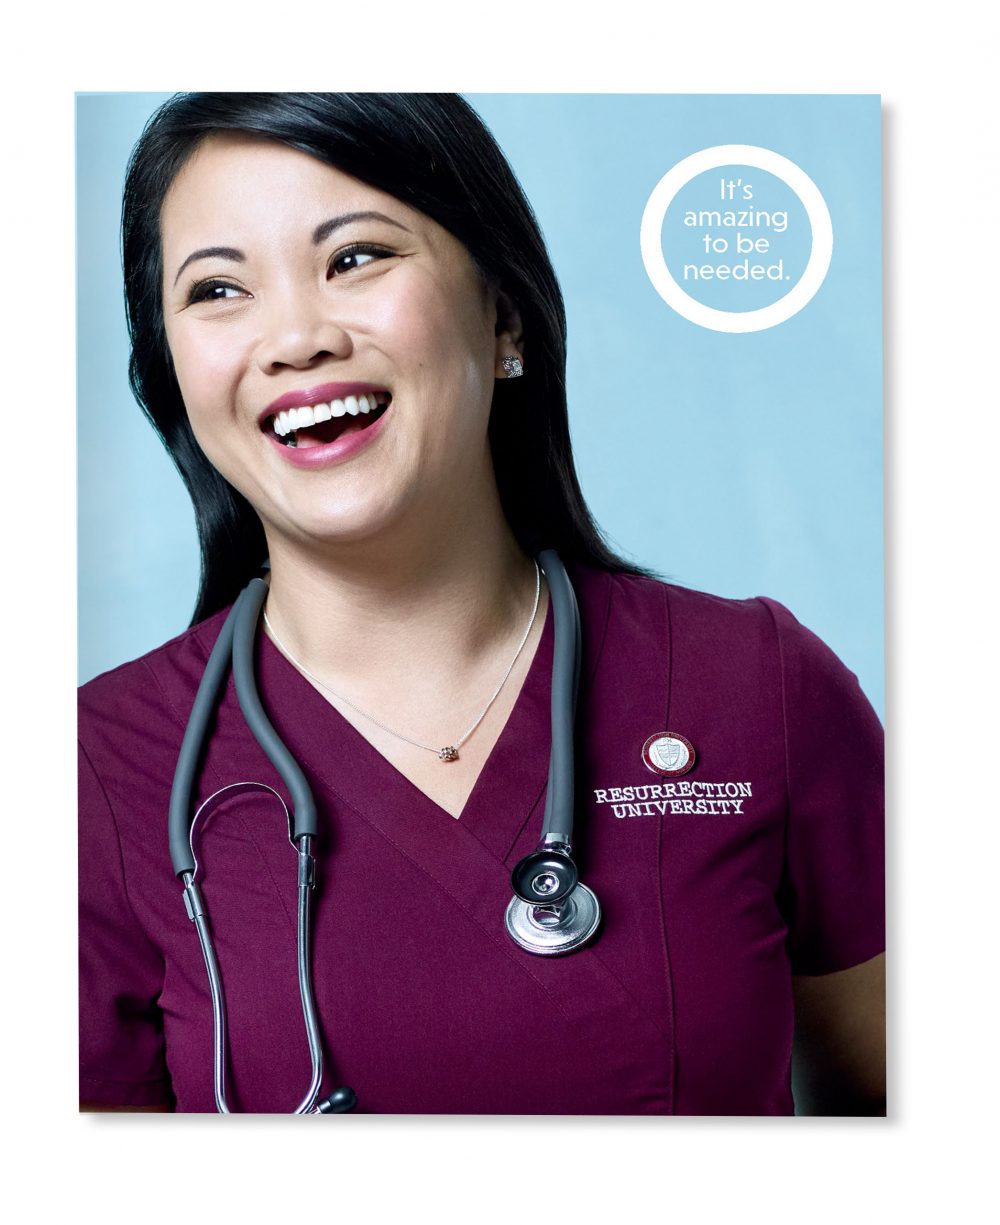 Portrait of an Asian woman in red scrubs, with "It's amazing to be needed" text superimposed.